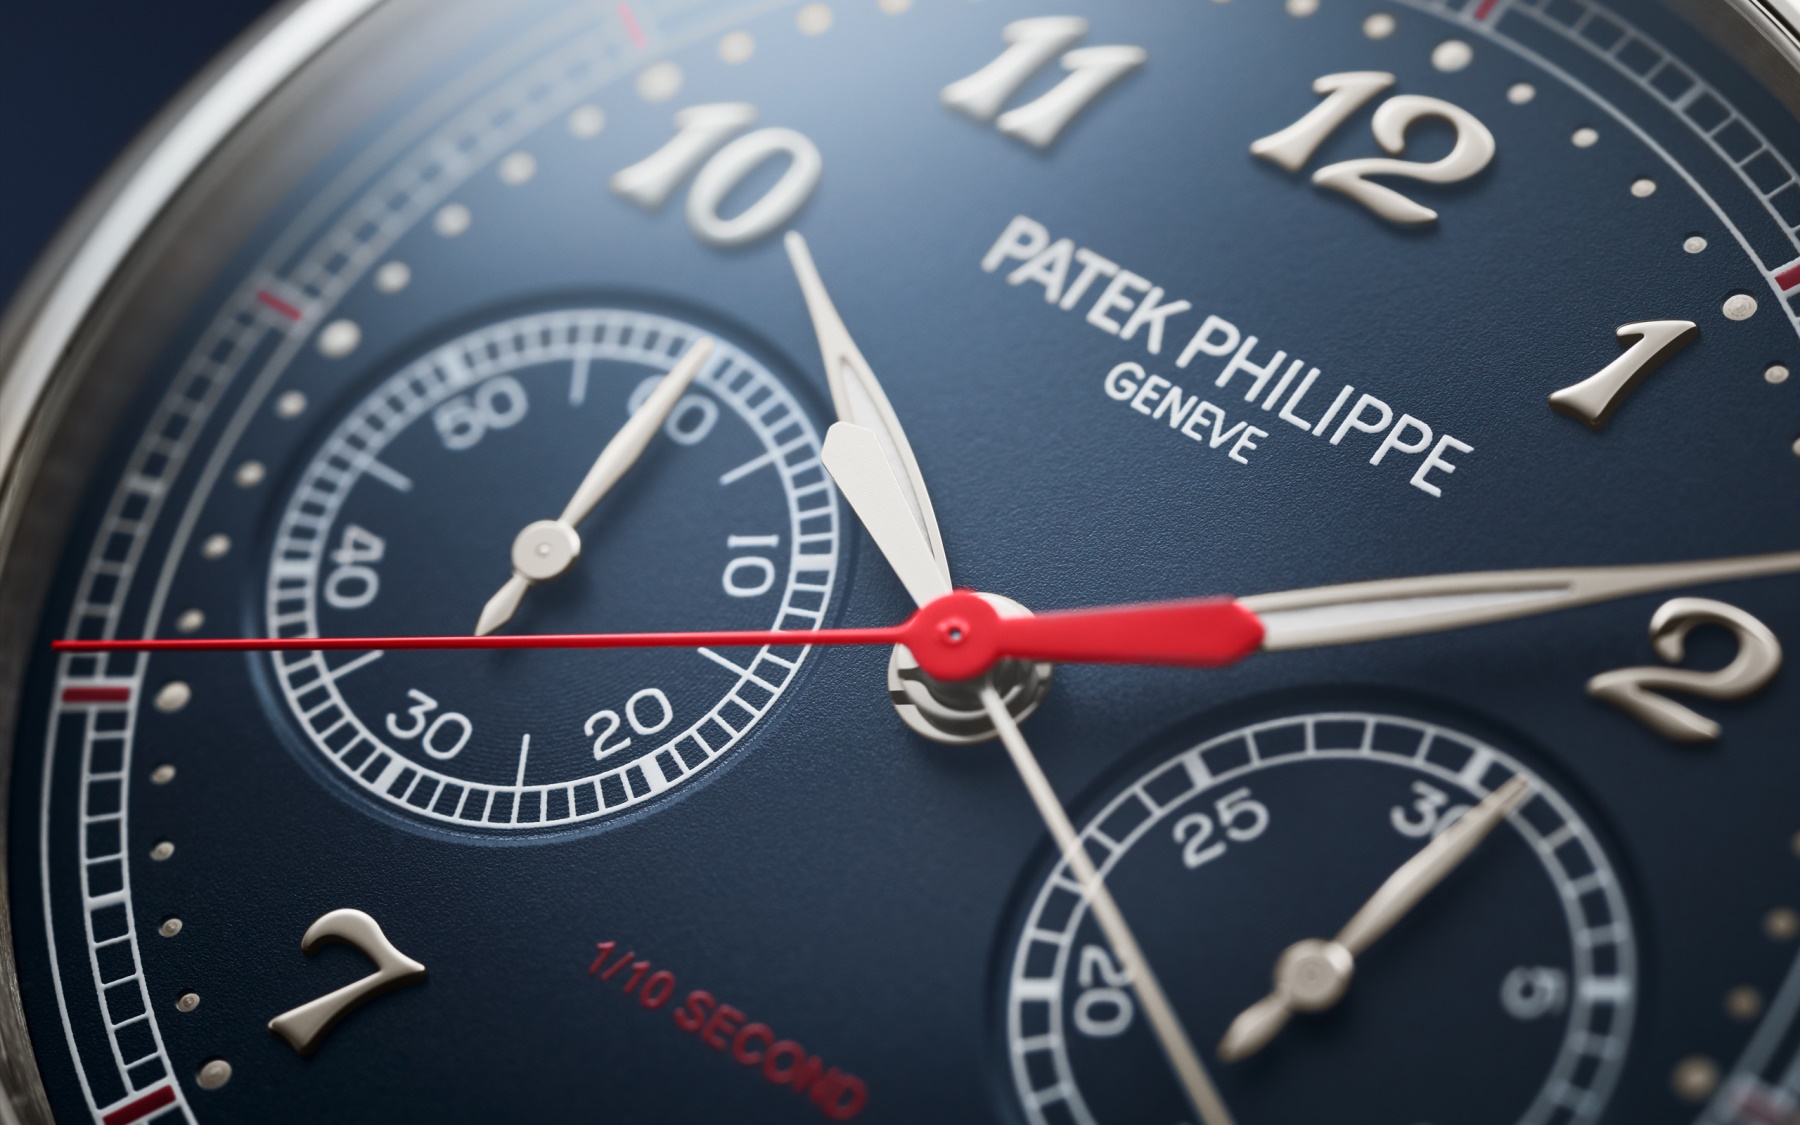 Patek Philippe 5470P Monopusher Chronograph 1-10th of a second_2